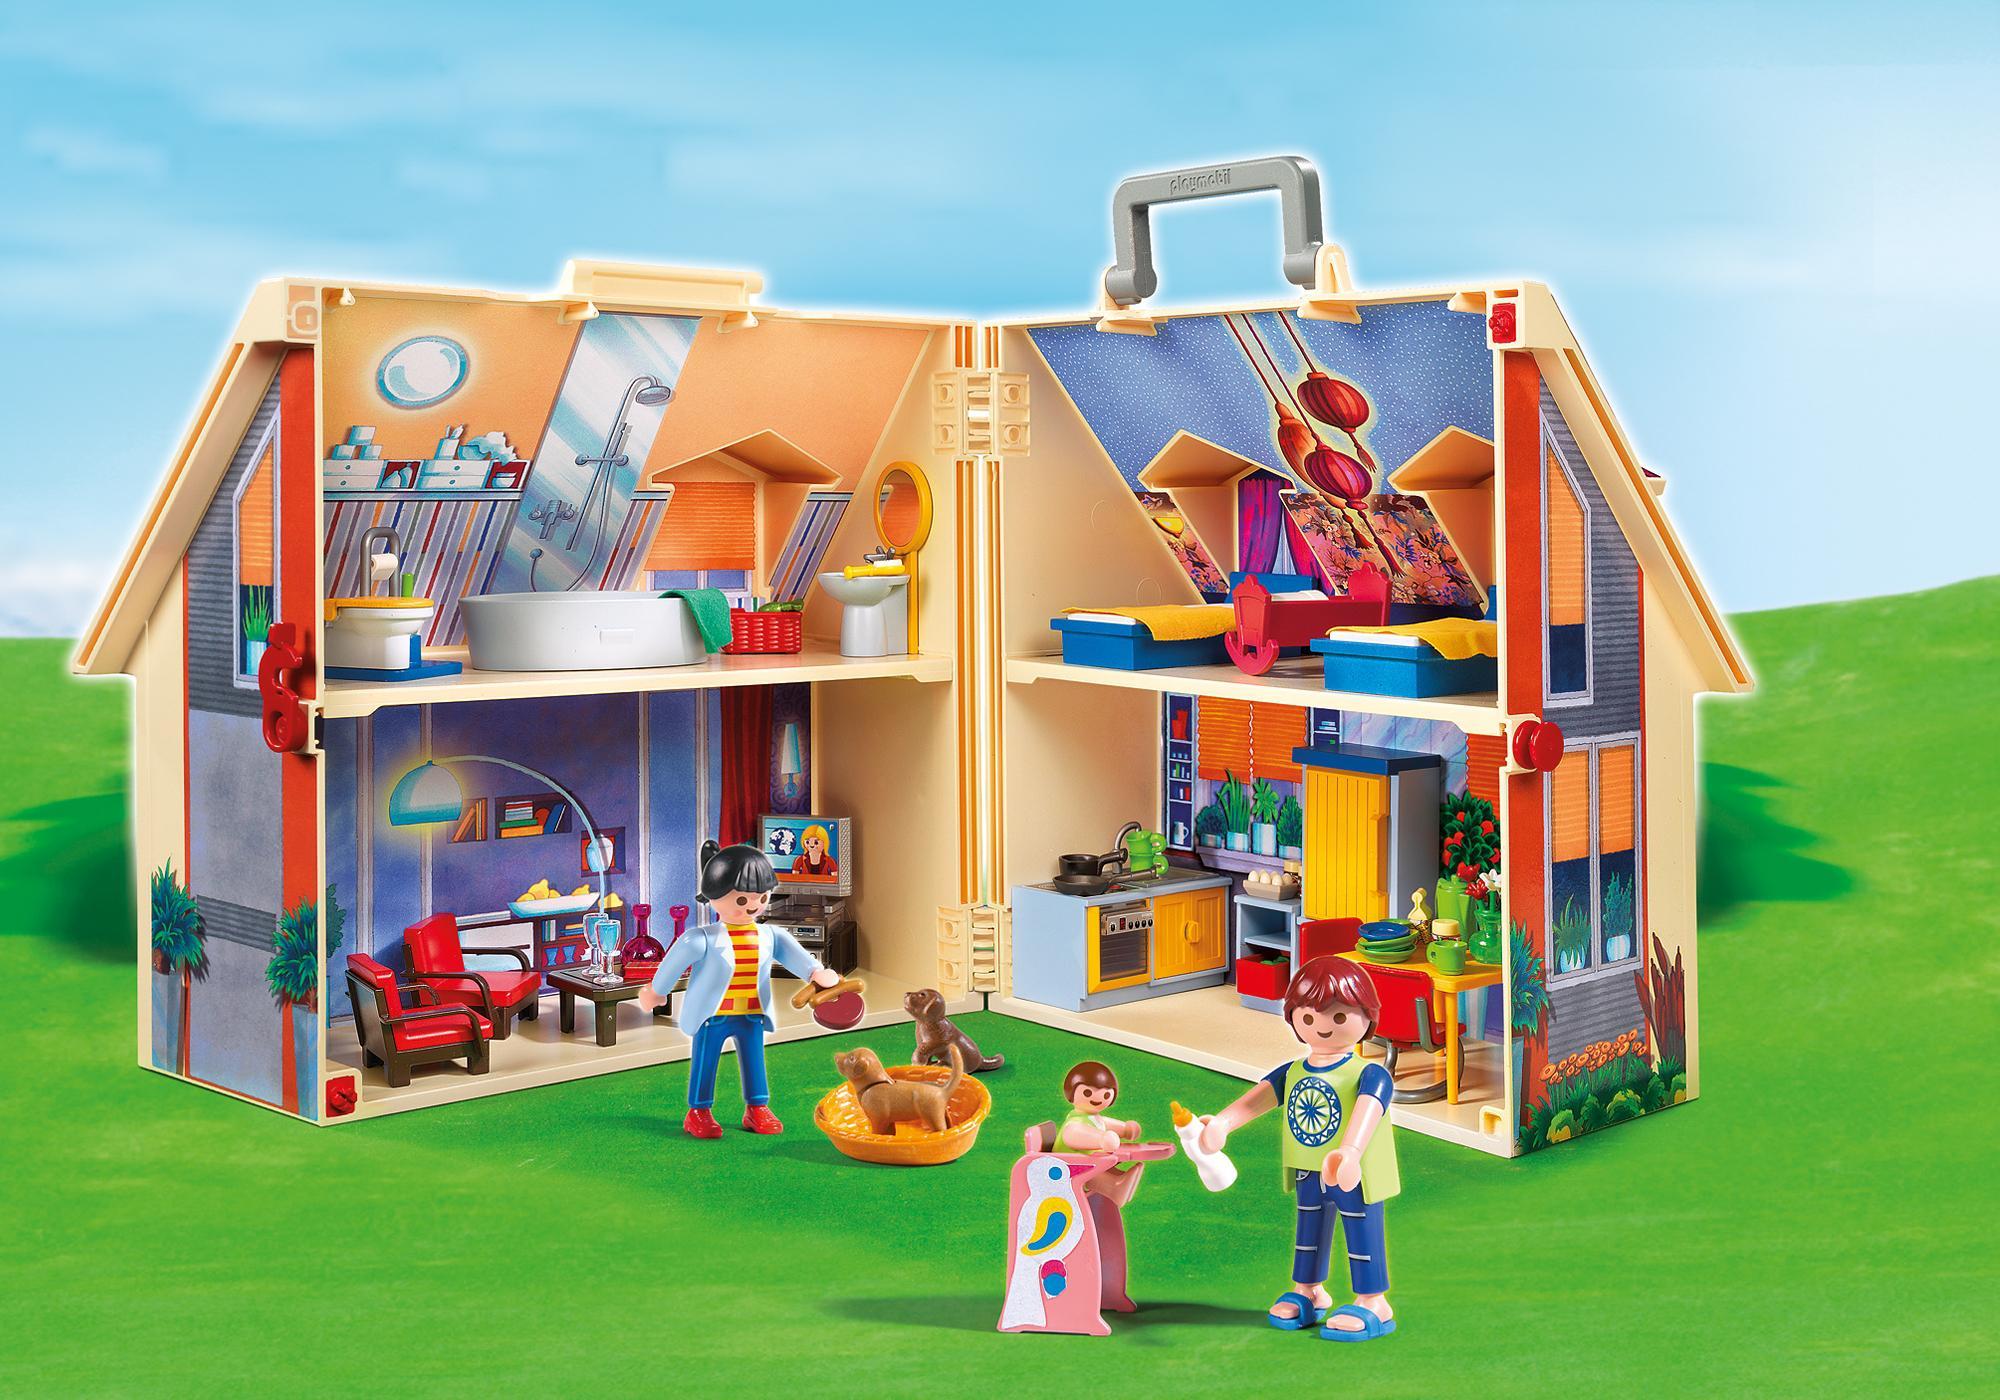 play mobil sets